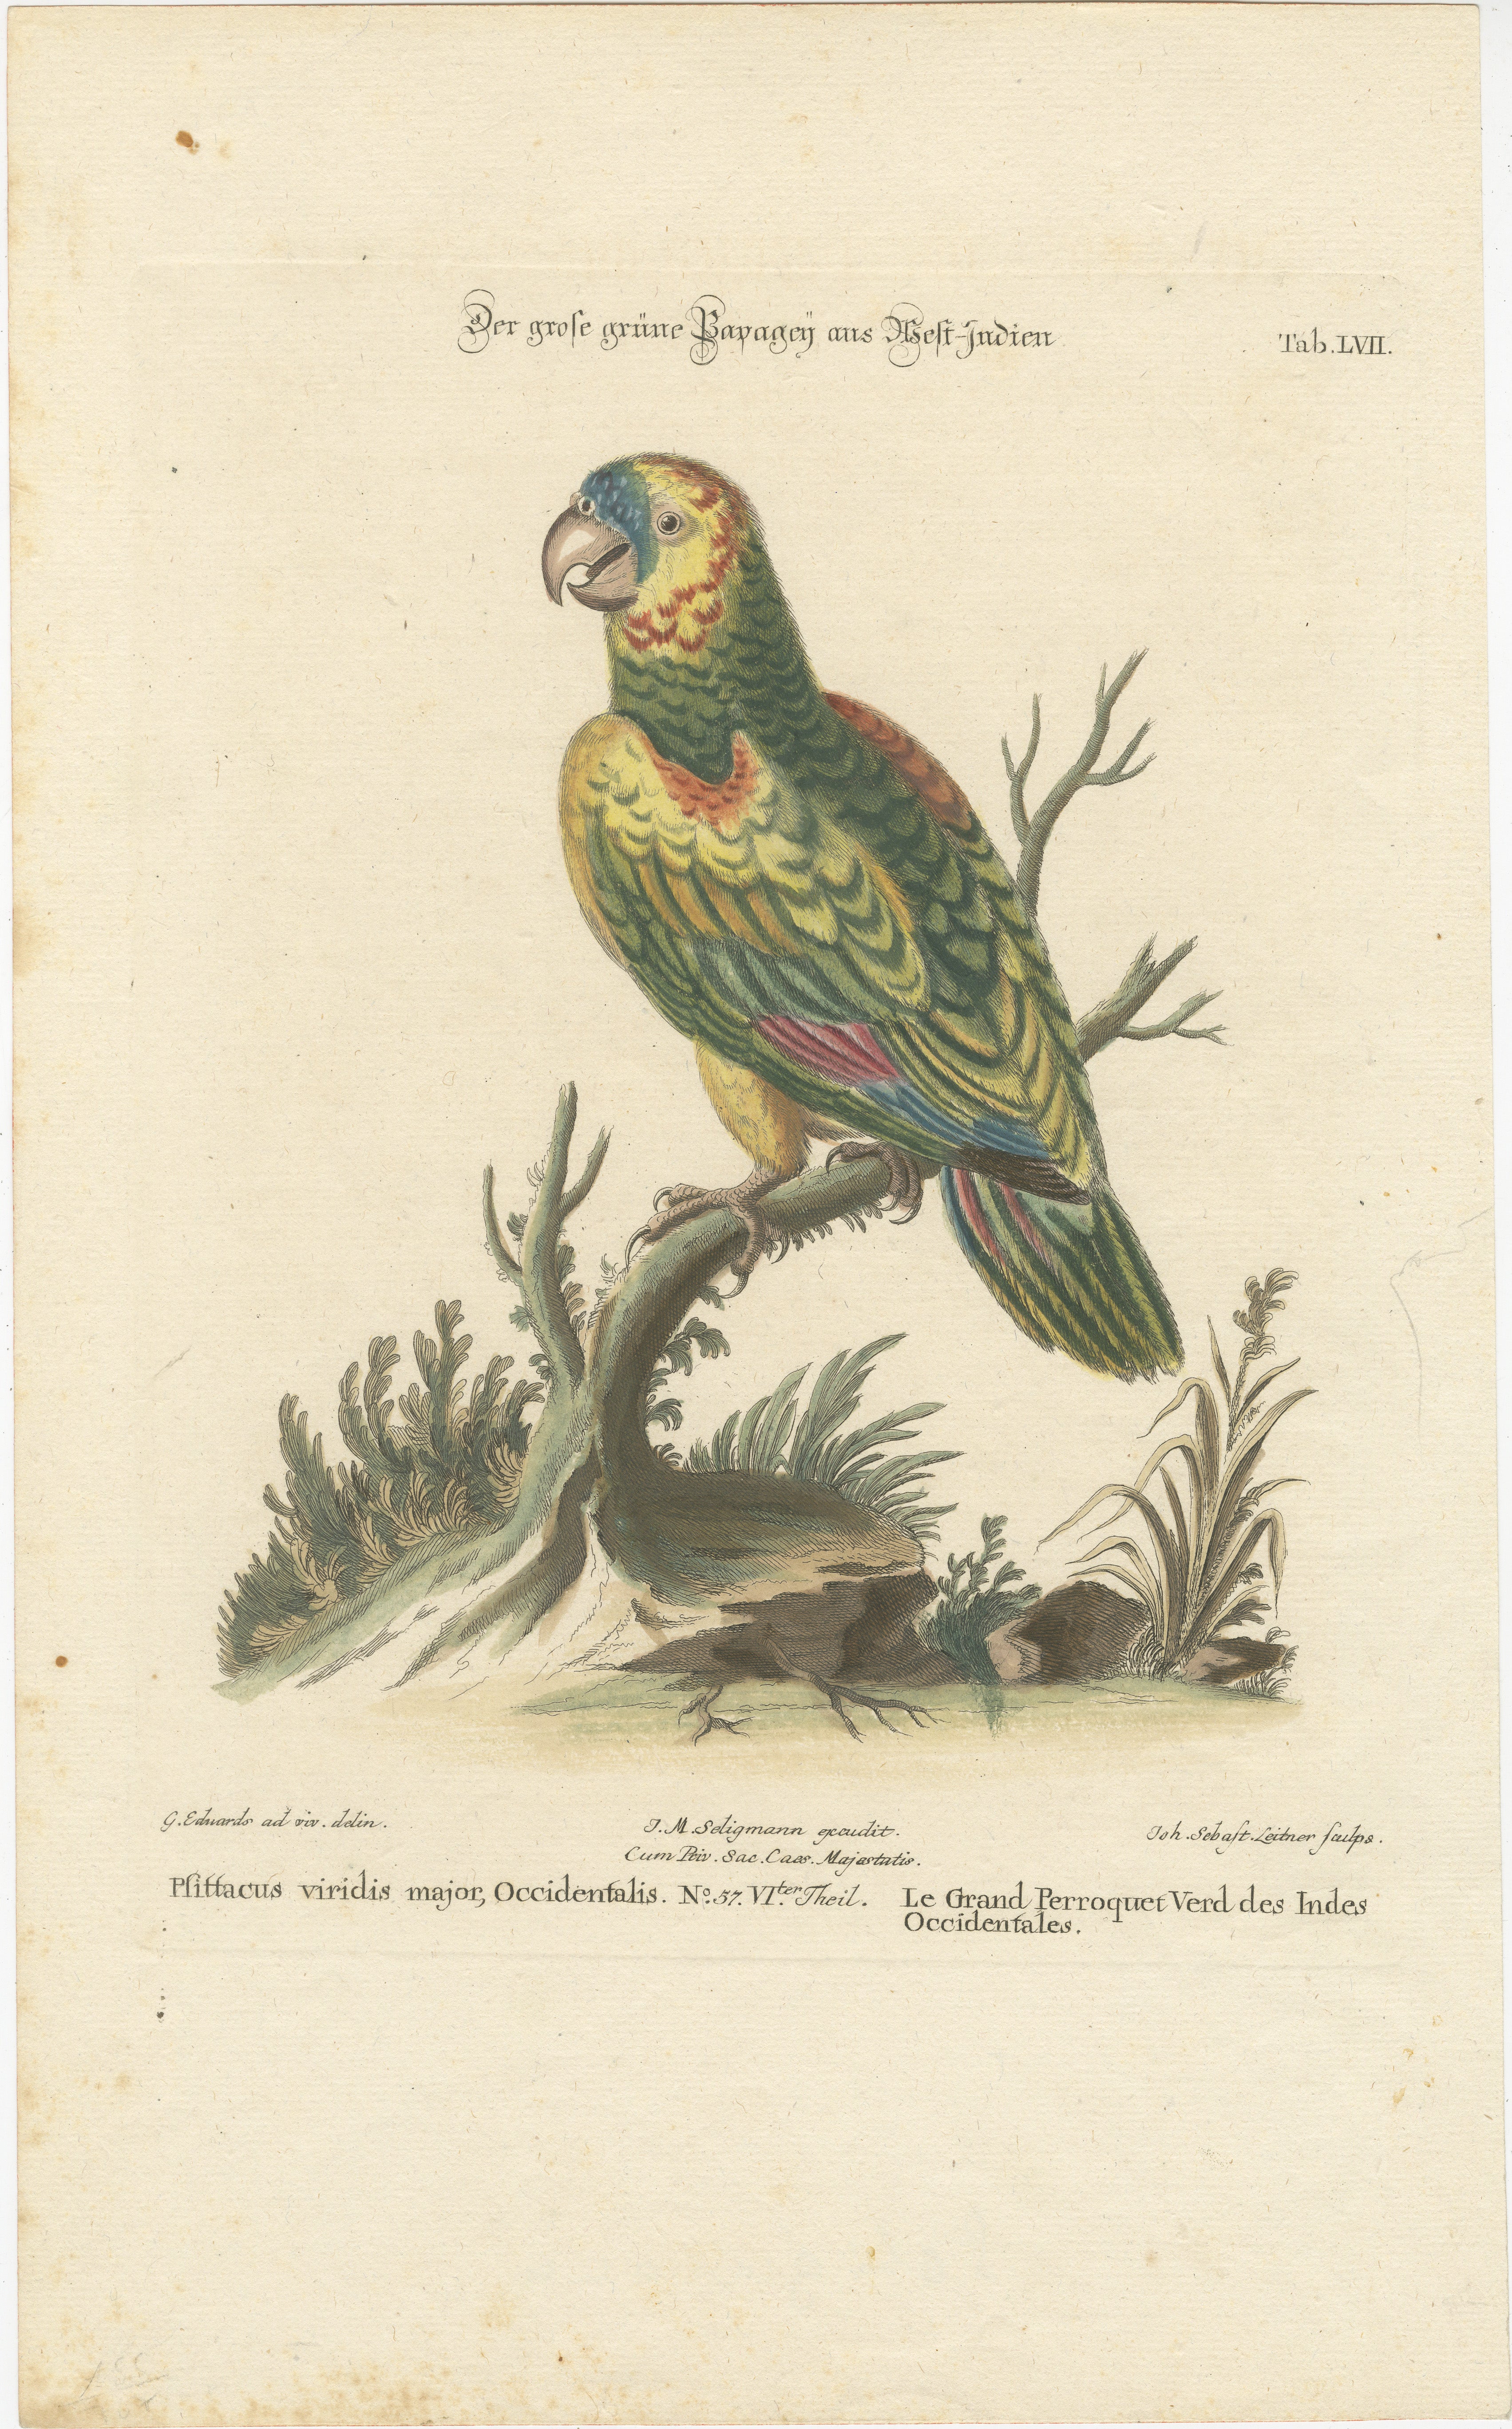 This is an 18th-century hand-colored engraving from Johann Michael Seligmann's collection, displaying a parrot species. Here’s the transcription and translation of the visible text:

- 